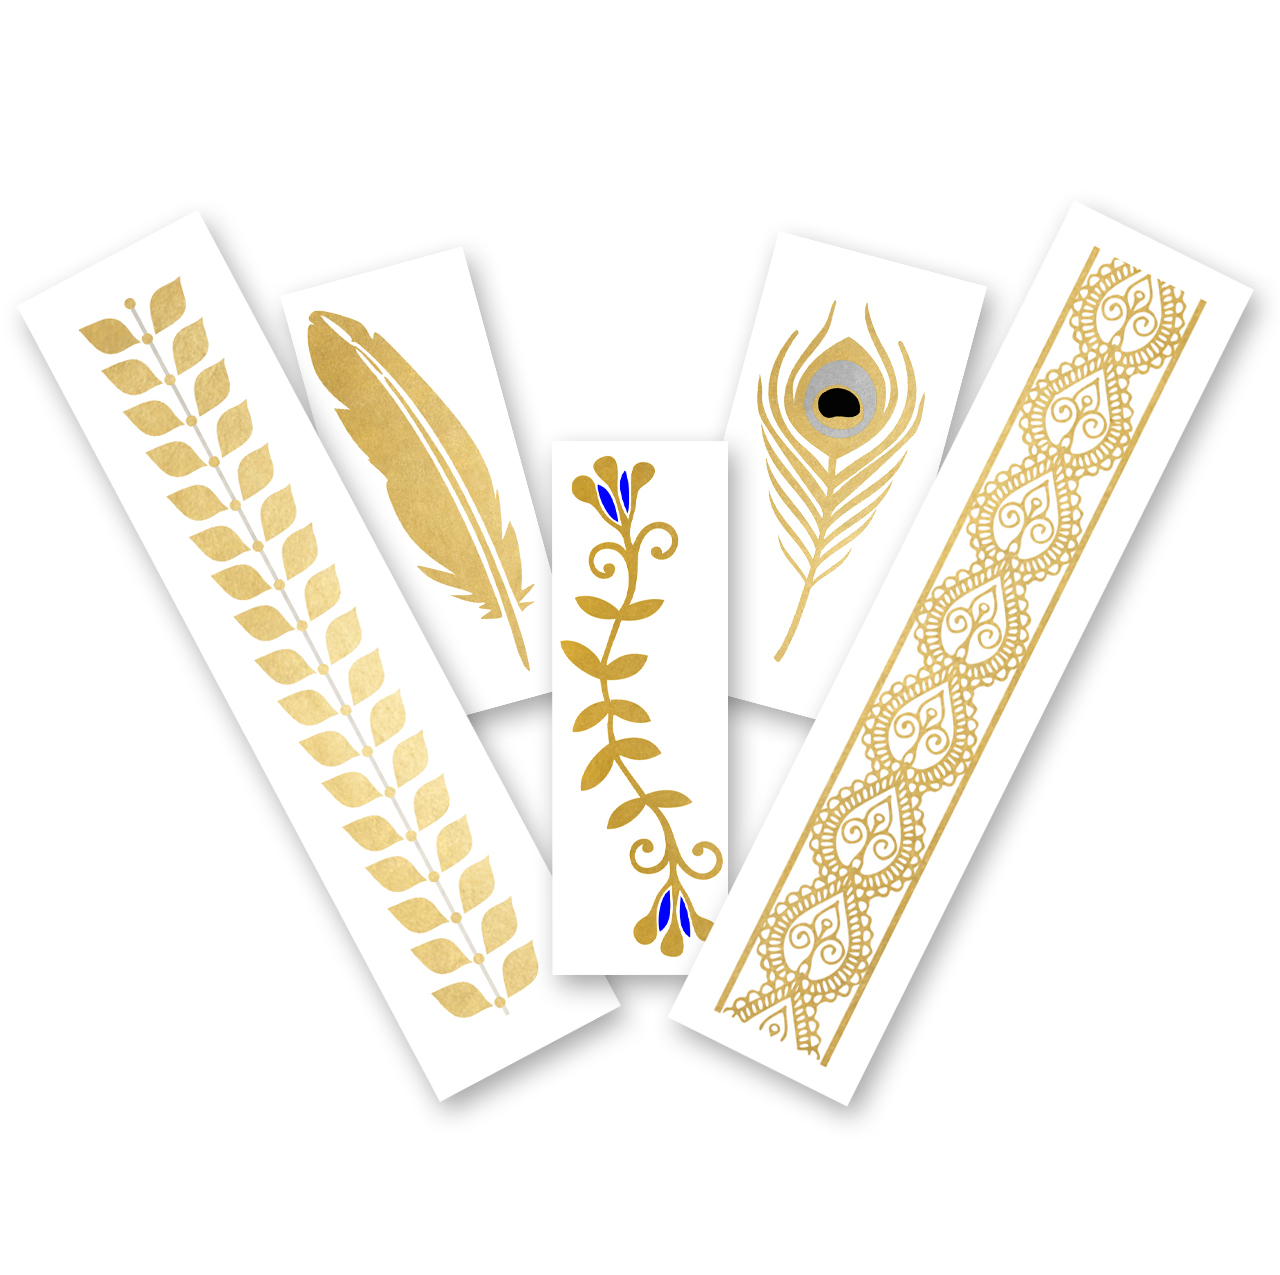 Tattoo Sticker? for Women, 5pcs Mixed Metallic Golden Silver Colorful  Pattern Temporary Disposable Arm Tattoo Stickers at Rs 2040.00 | Hyderabad|  ID: 2852791984830